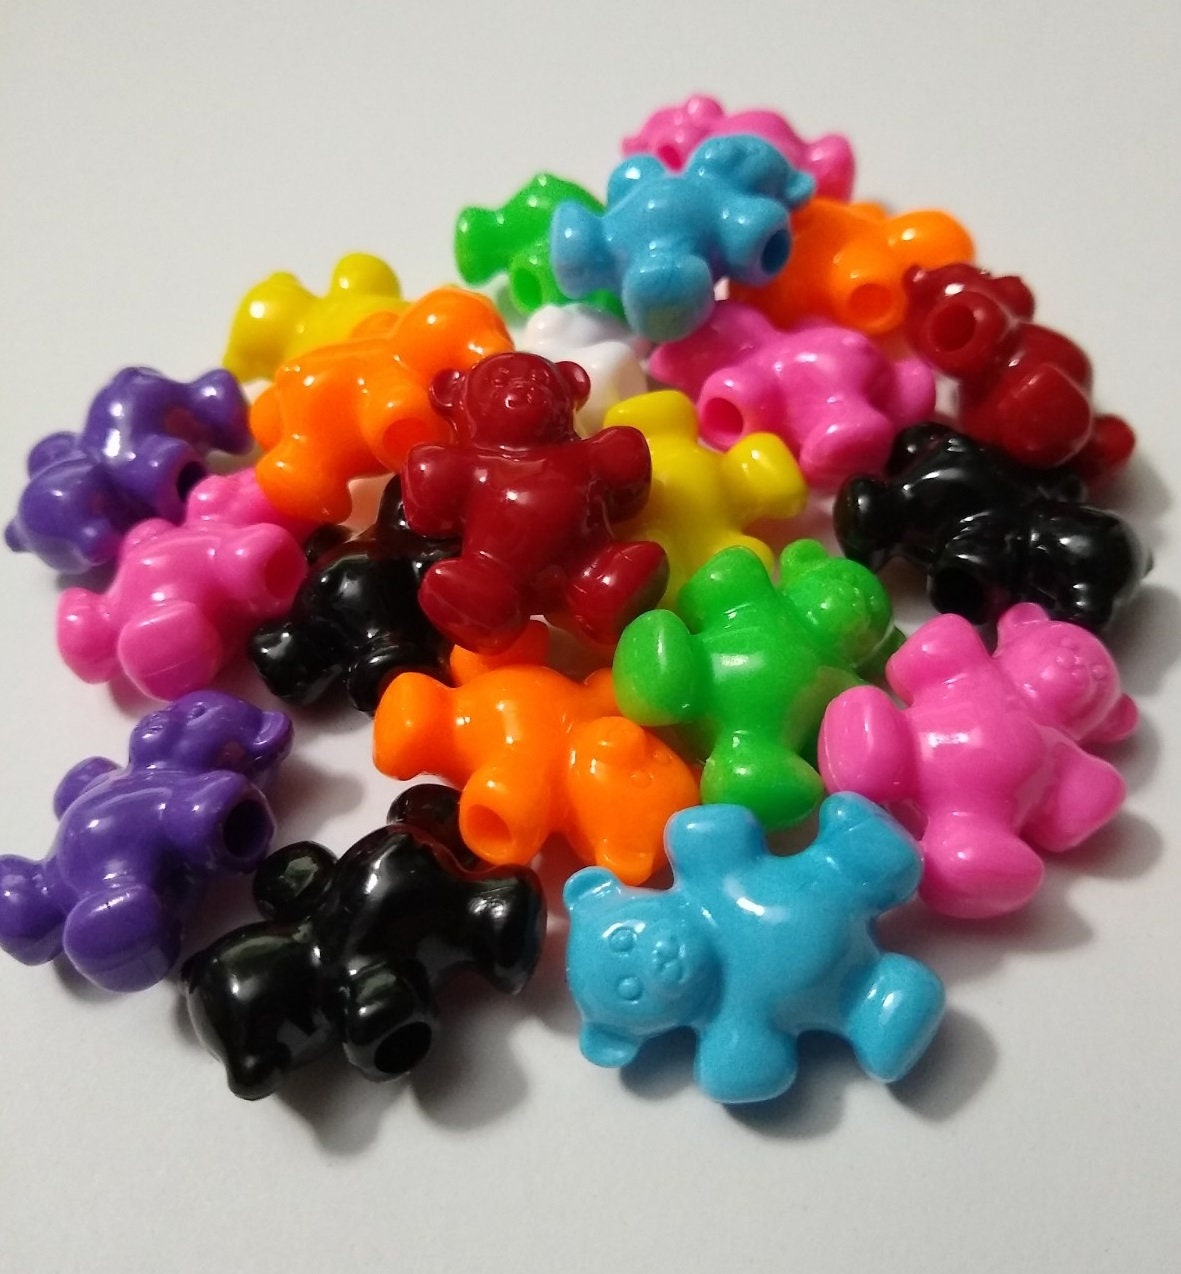 180 Pcs Animal Shaped Beads Zoo Animal Pony Bead Charms Plastic Colorful  Craft Beads 0.66 Pounds with Various Animal Design for Kids DIY Jewelry  Craft